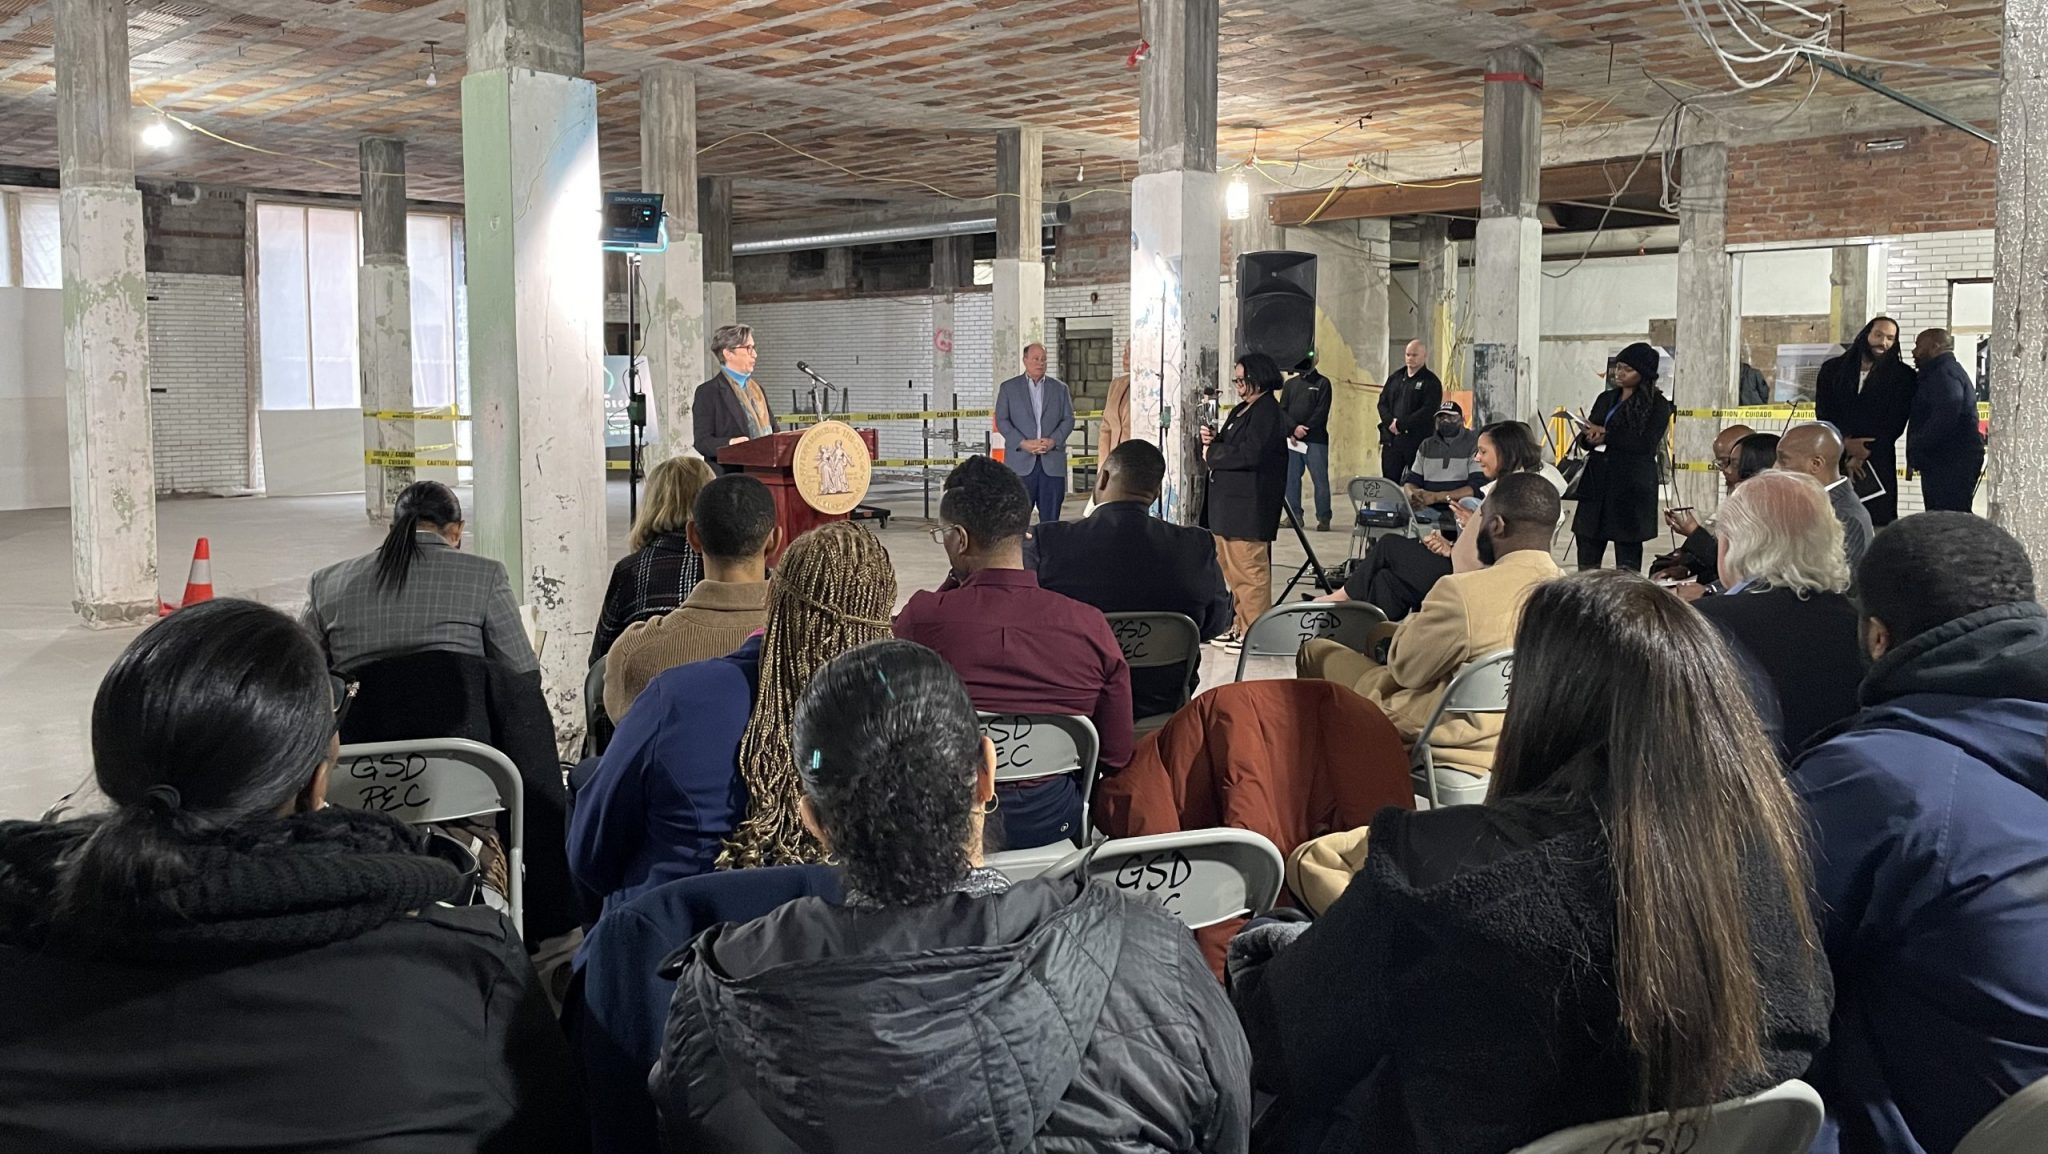 Community stakeholders gathered with local dignitaries on Wednesday to announce $14.5 million in MEDC grants that will go toward development projects in Detroit.